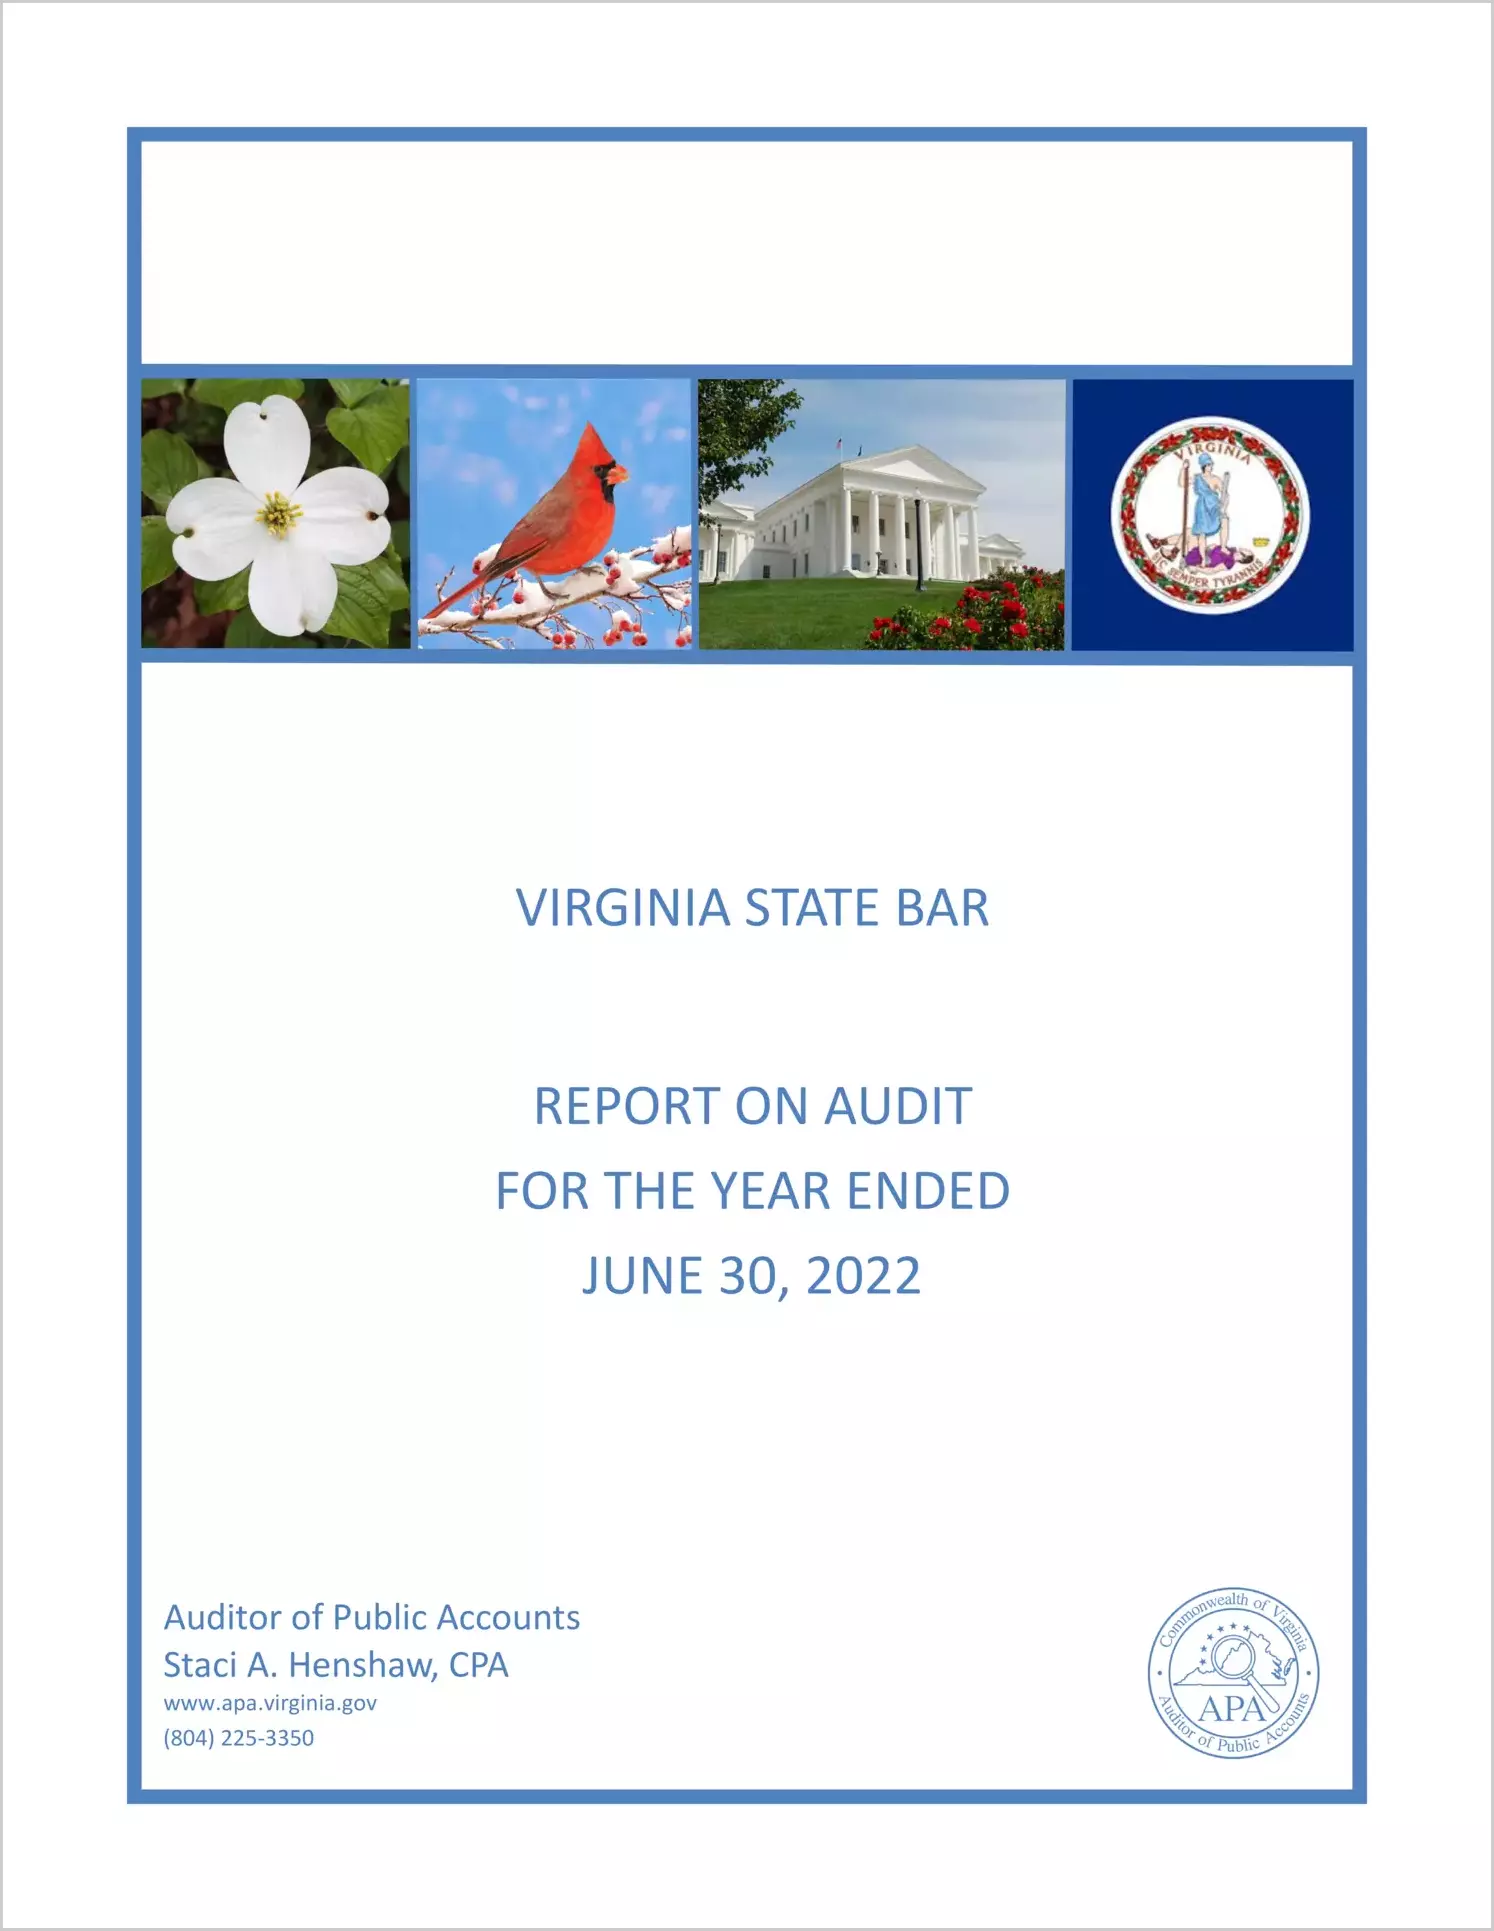 Virginia State Bar for the year ended June 30, 2022